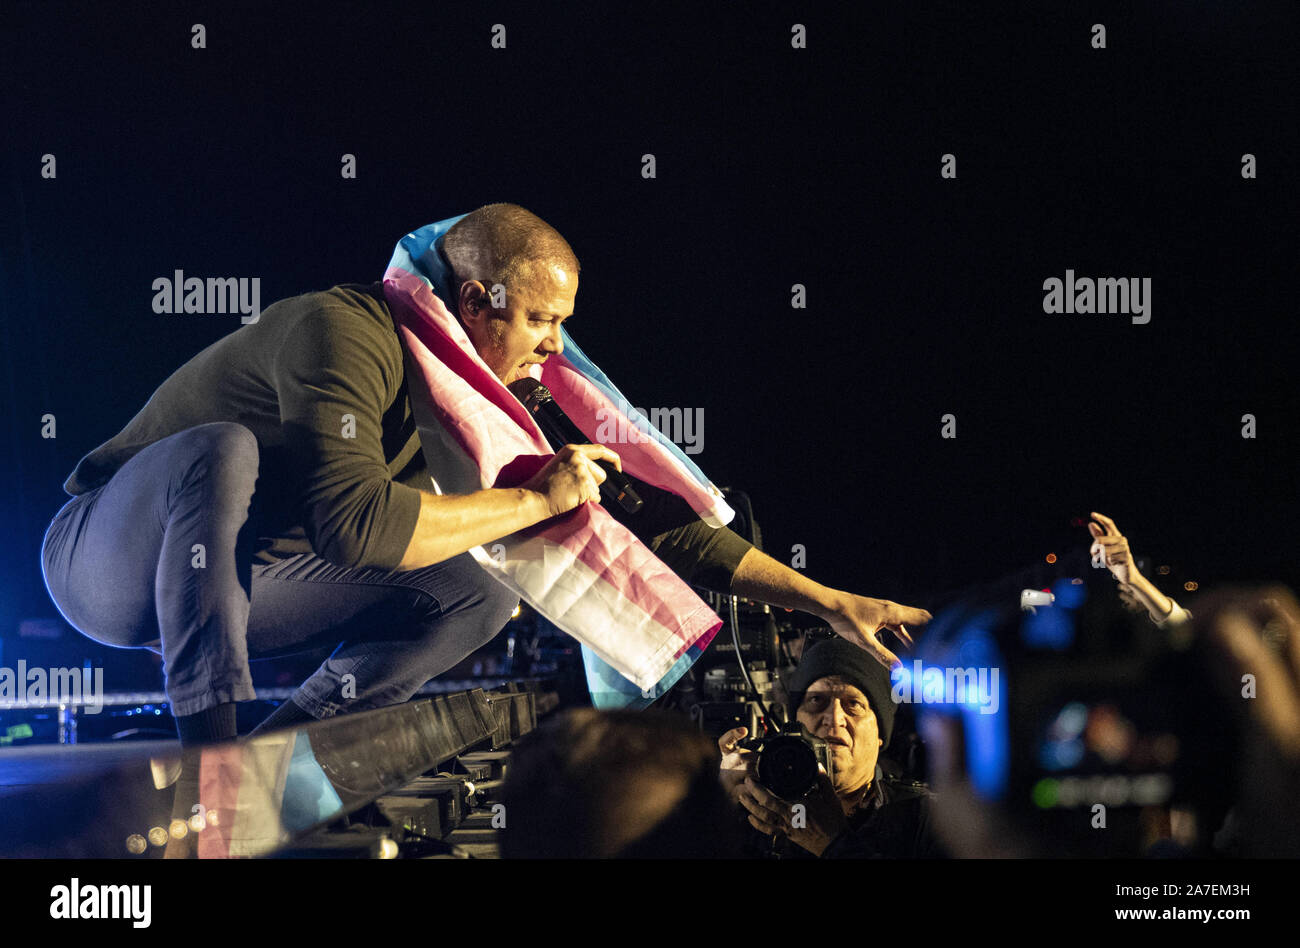 November 1, 2019, Austin, Texas, U.S: IMAGINE DRAGONS Outdoor Concert at the Germania Insurance Super Stage at the Circuit of the Americas Lead Singer DAN REYNOLDS interacting with the crowd. (Credit Image: © Hoss McBain/ZUMA Wire) Stock Photo